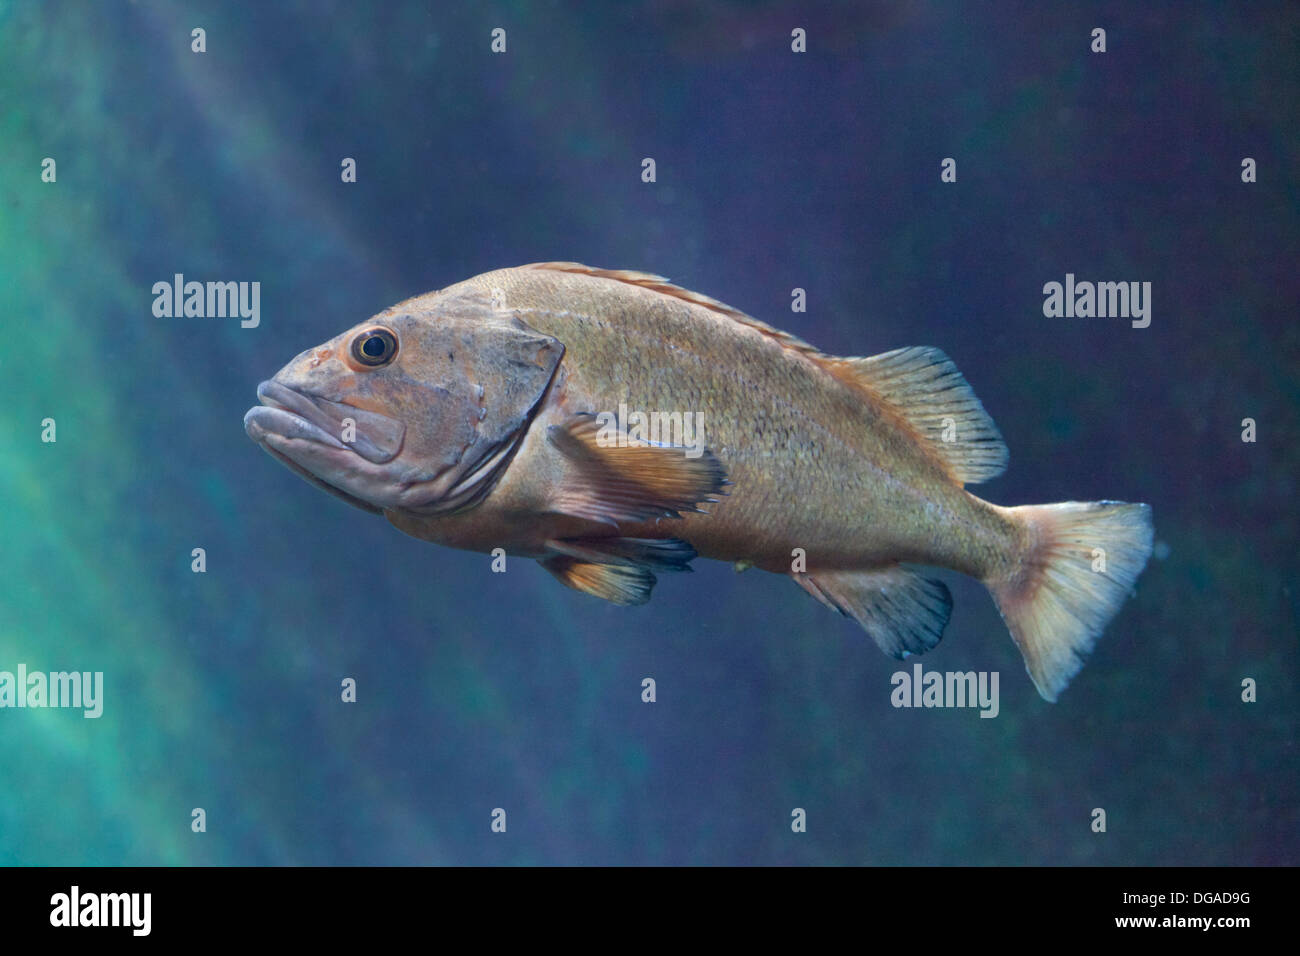 Gag Grouper in the water Stock Photo